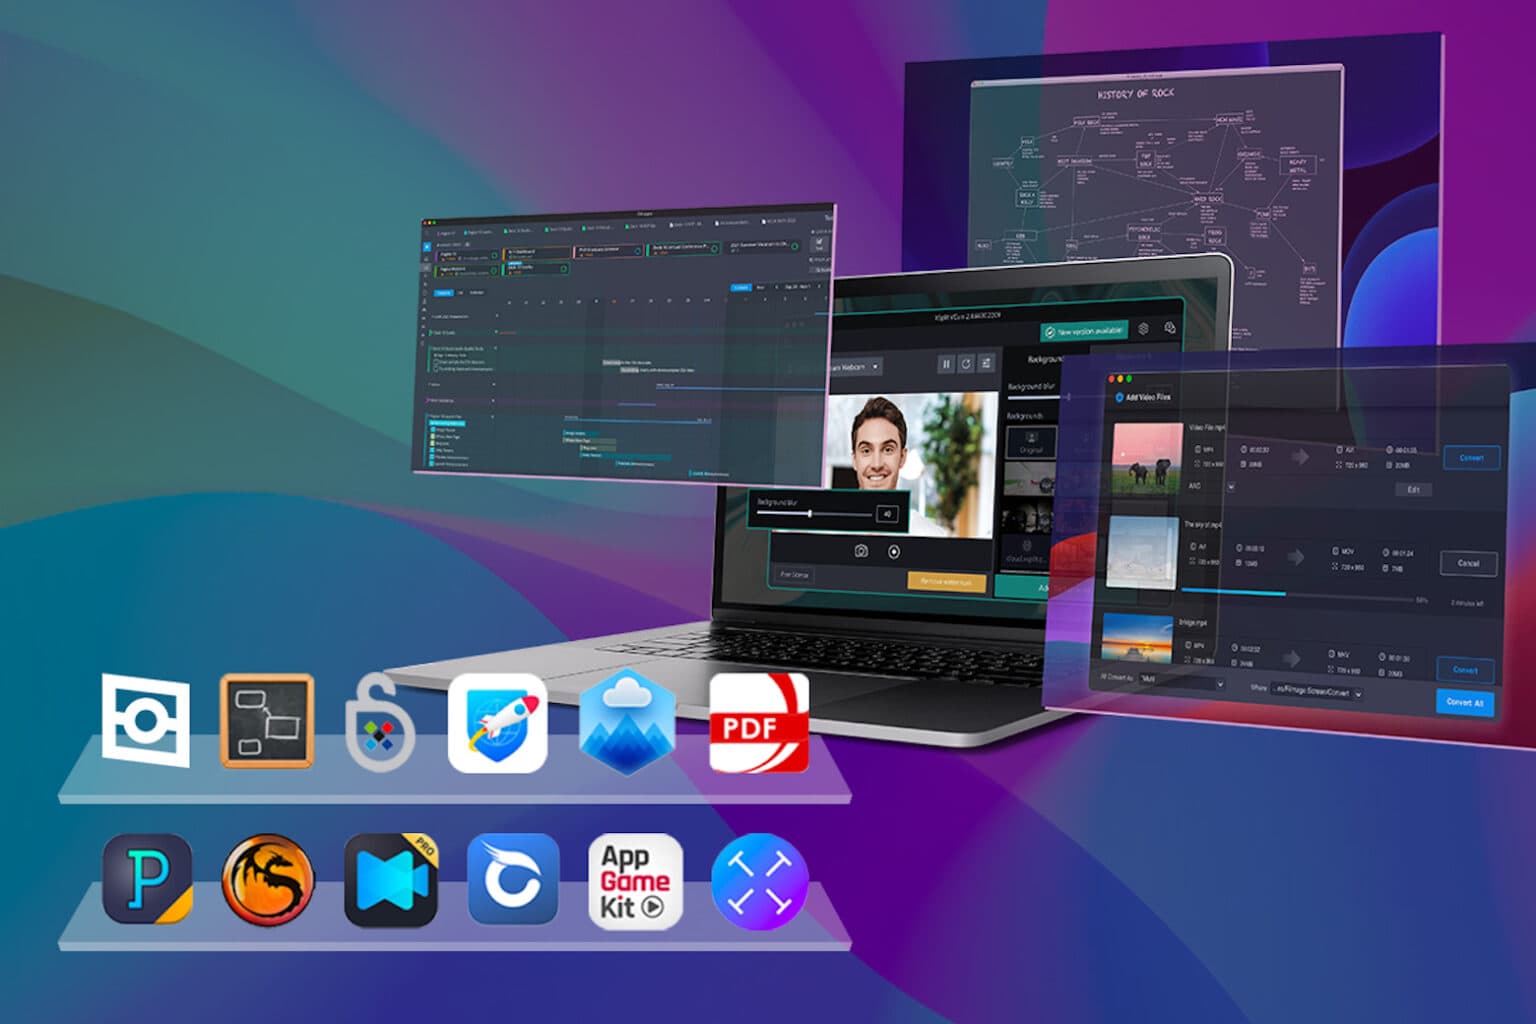 Get these awesome Mac apps for under $20.